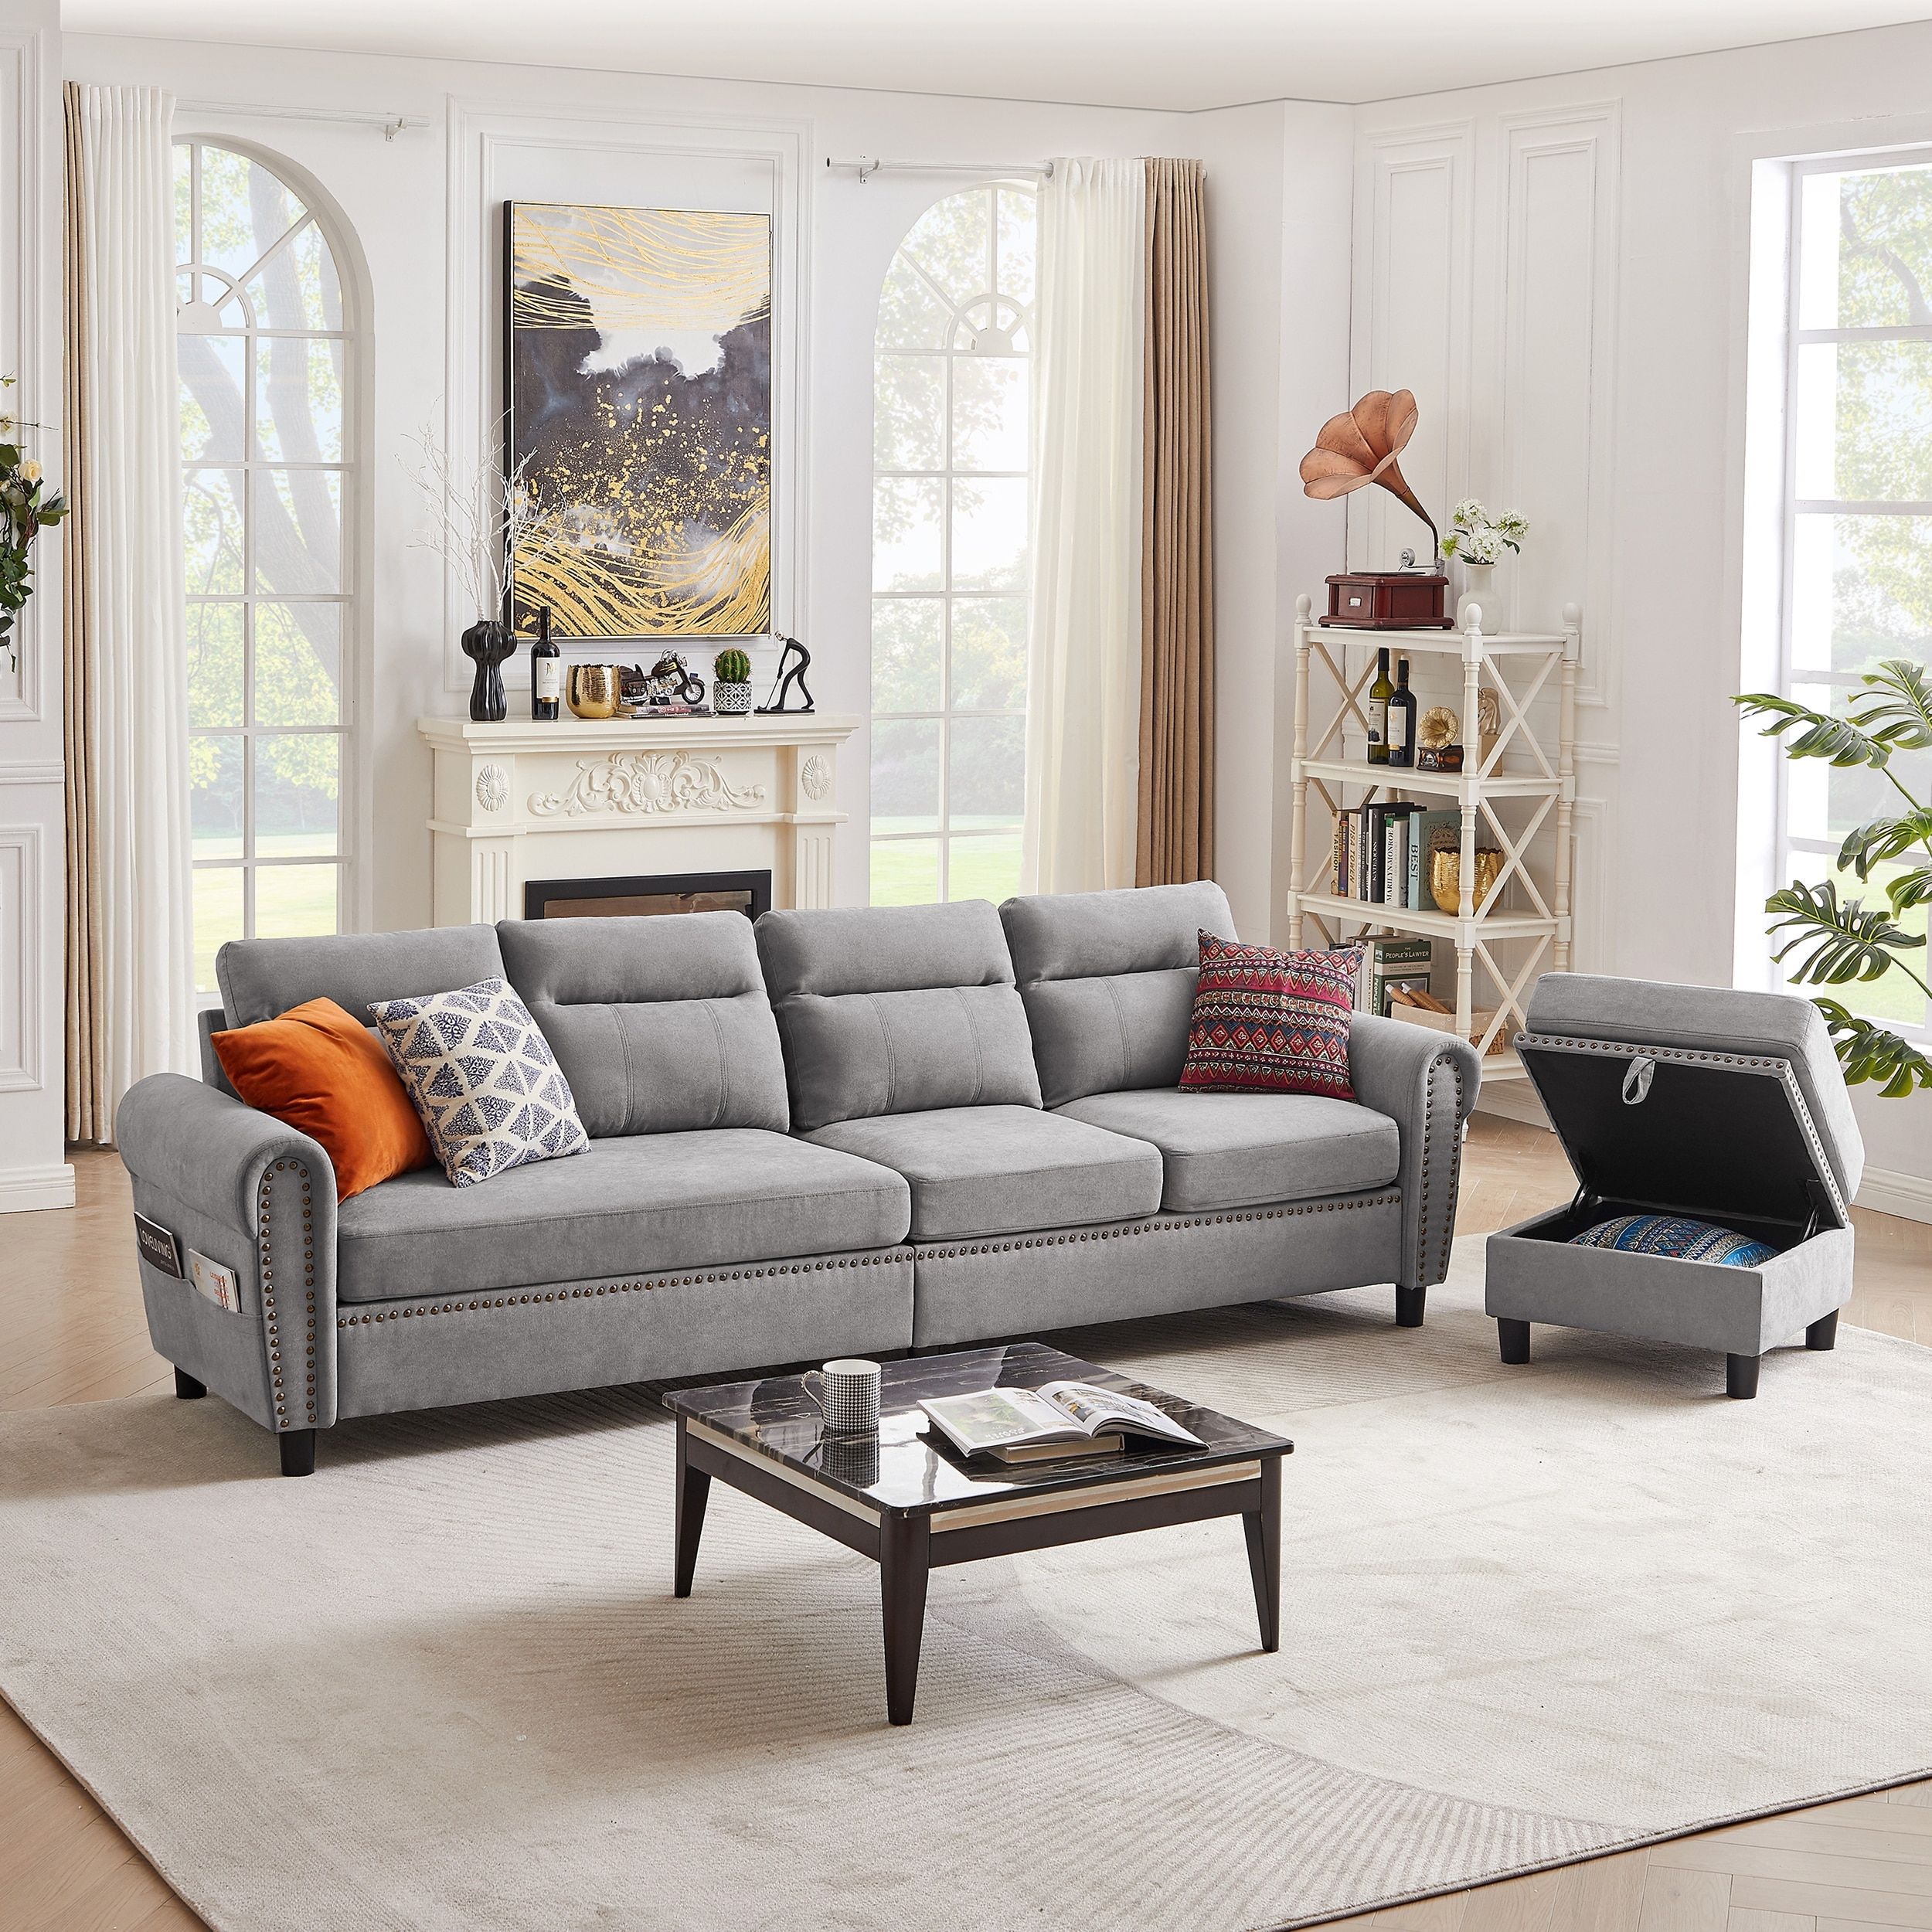 4 Seater L Shaped Reversible Sectional Sofa With Storage Ottoman – Bed Bath  & Beyond – 37992798 Throughout Reversible Sectional Sofas (Photo 5 of 15)